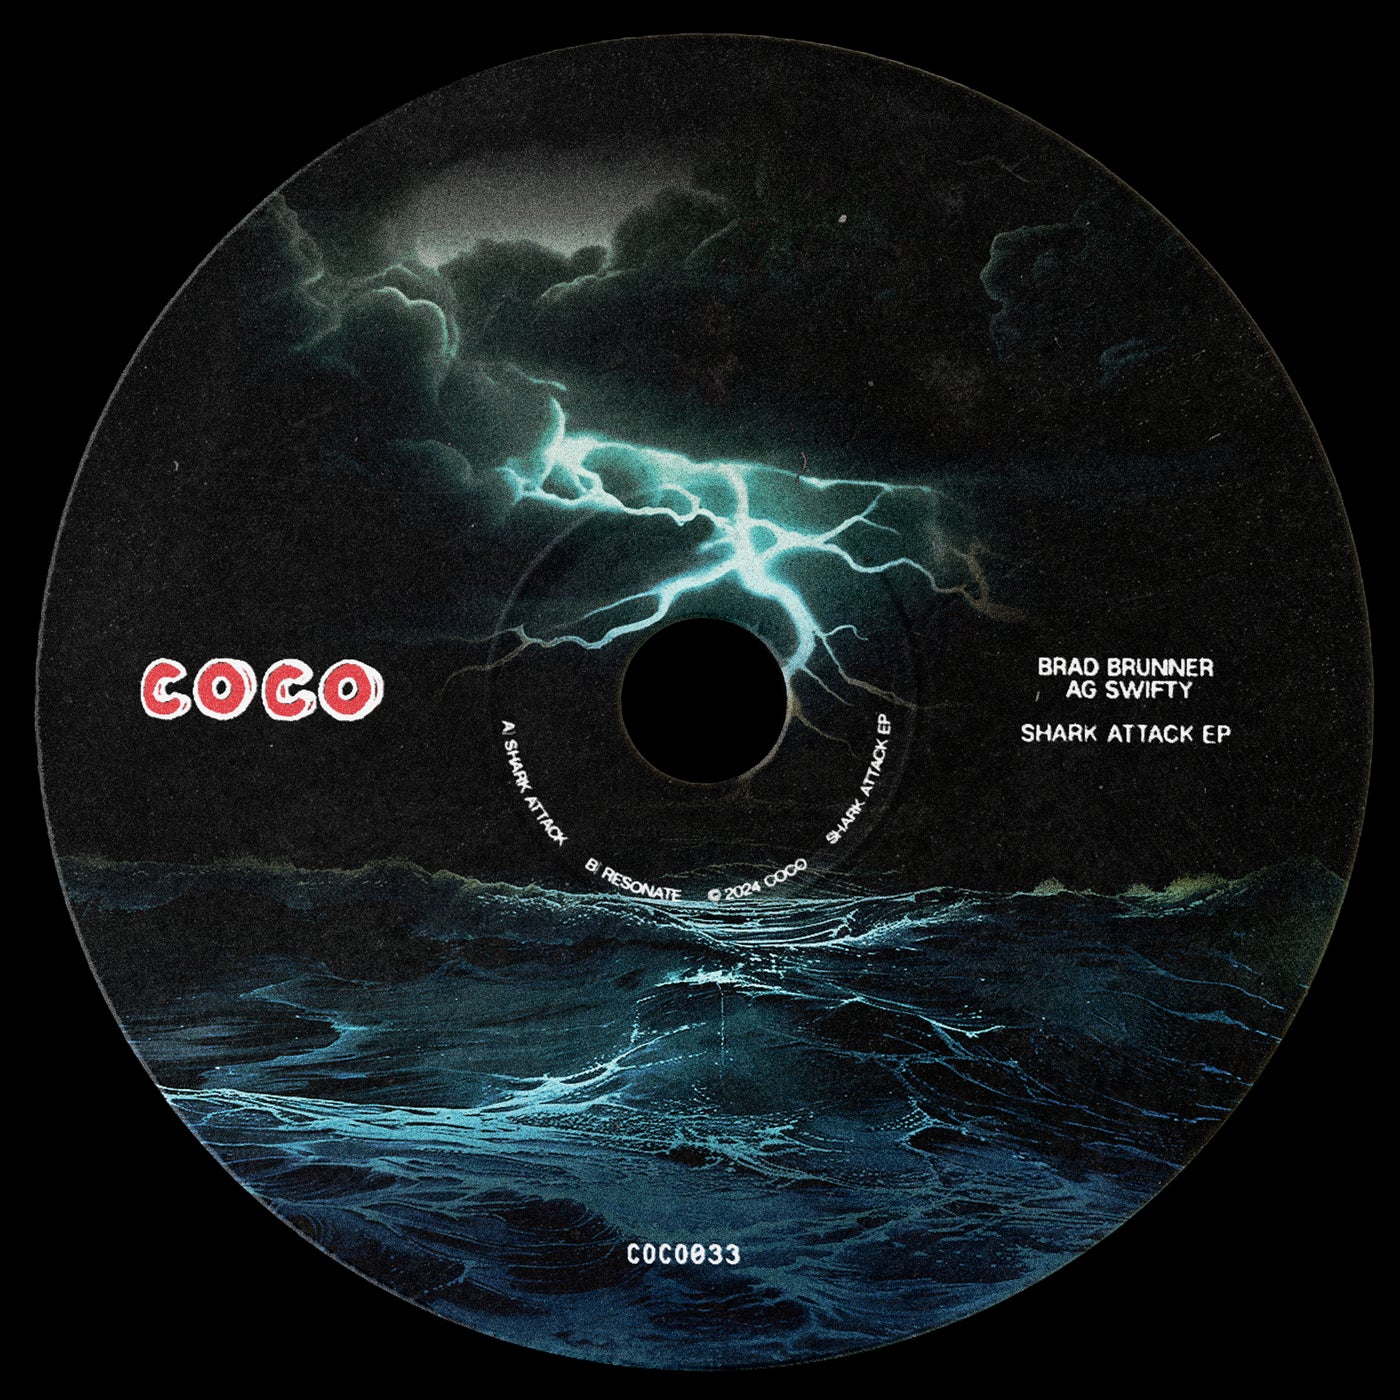 image cover: Brad Brunner, AG Swifty - Shark Attack EP on COCO